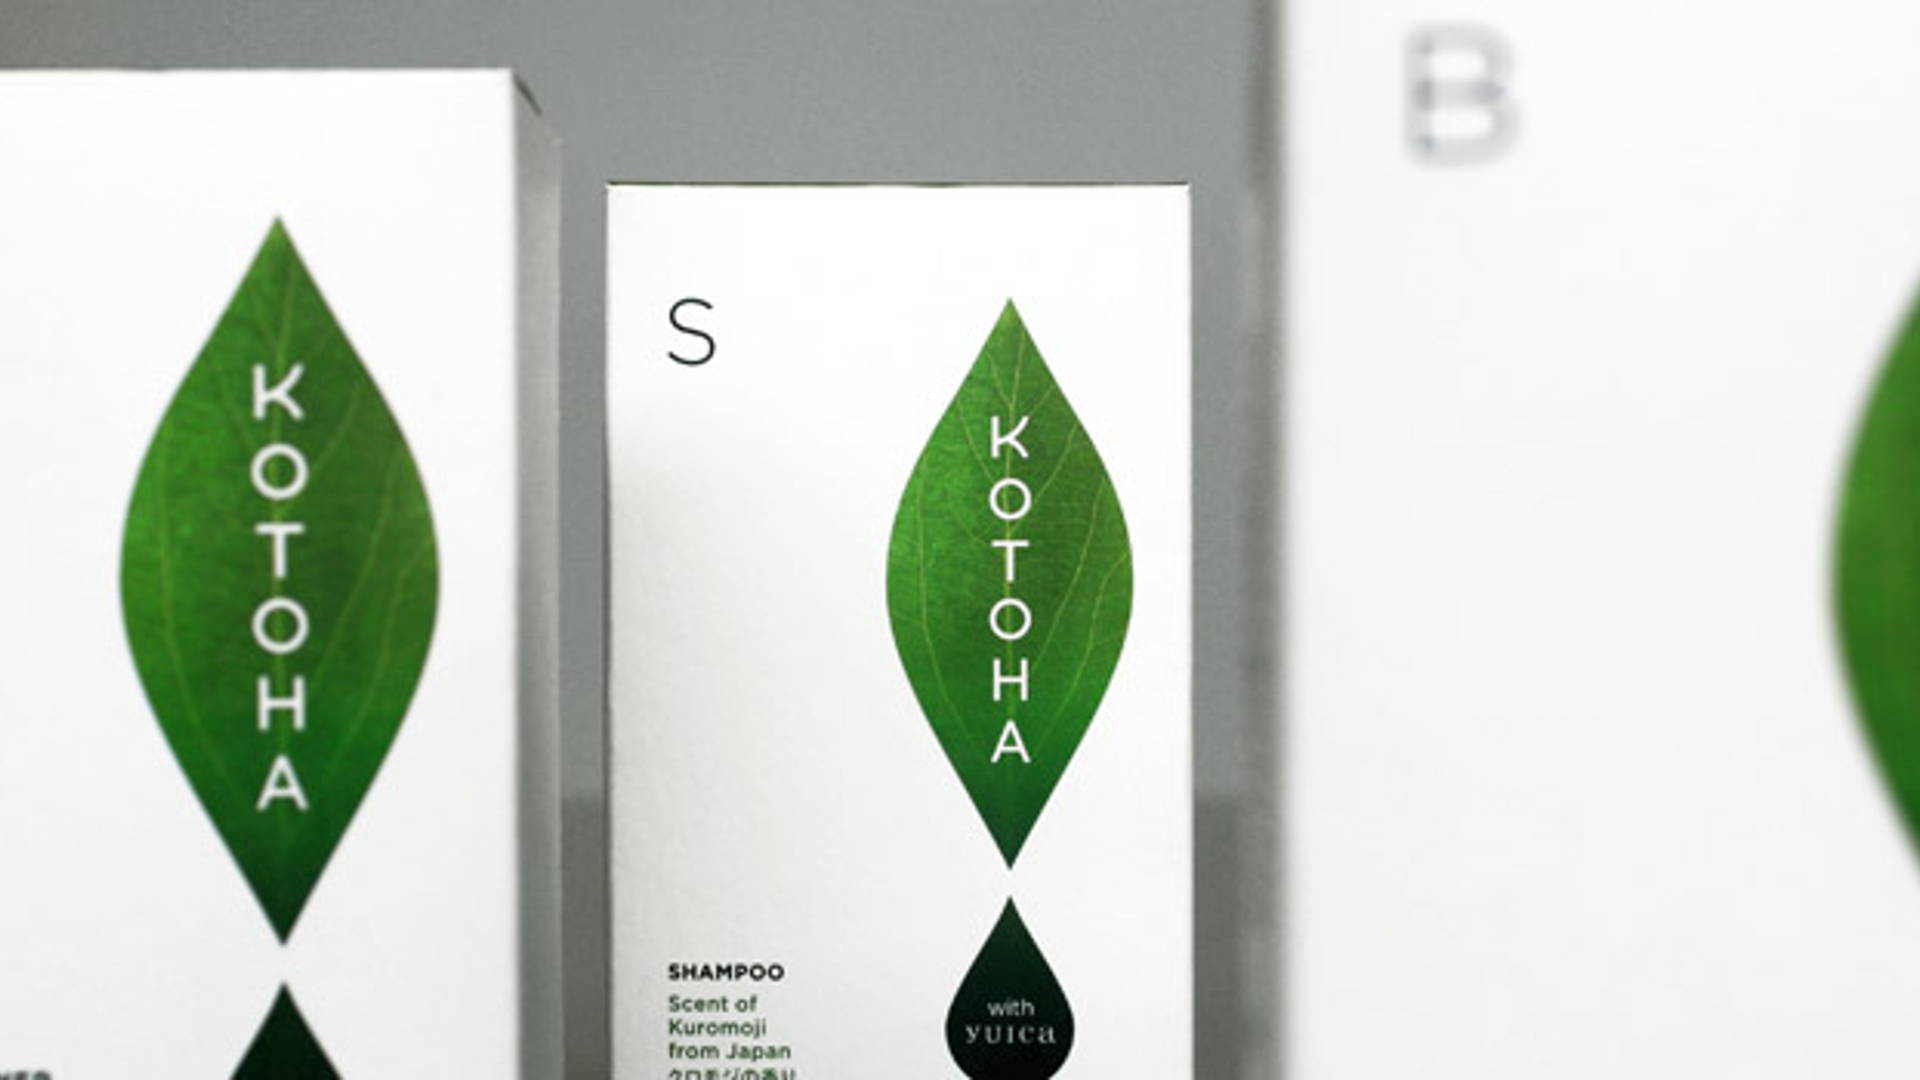 Featured image for Kotoha Hair & Body Care